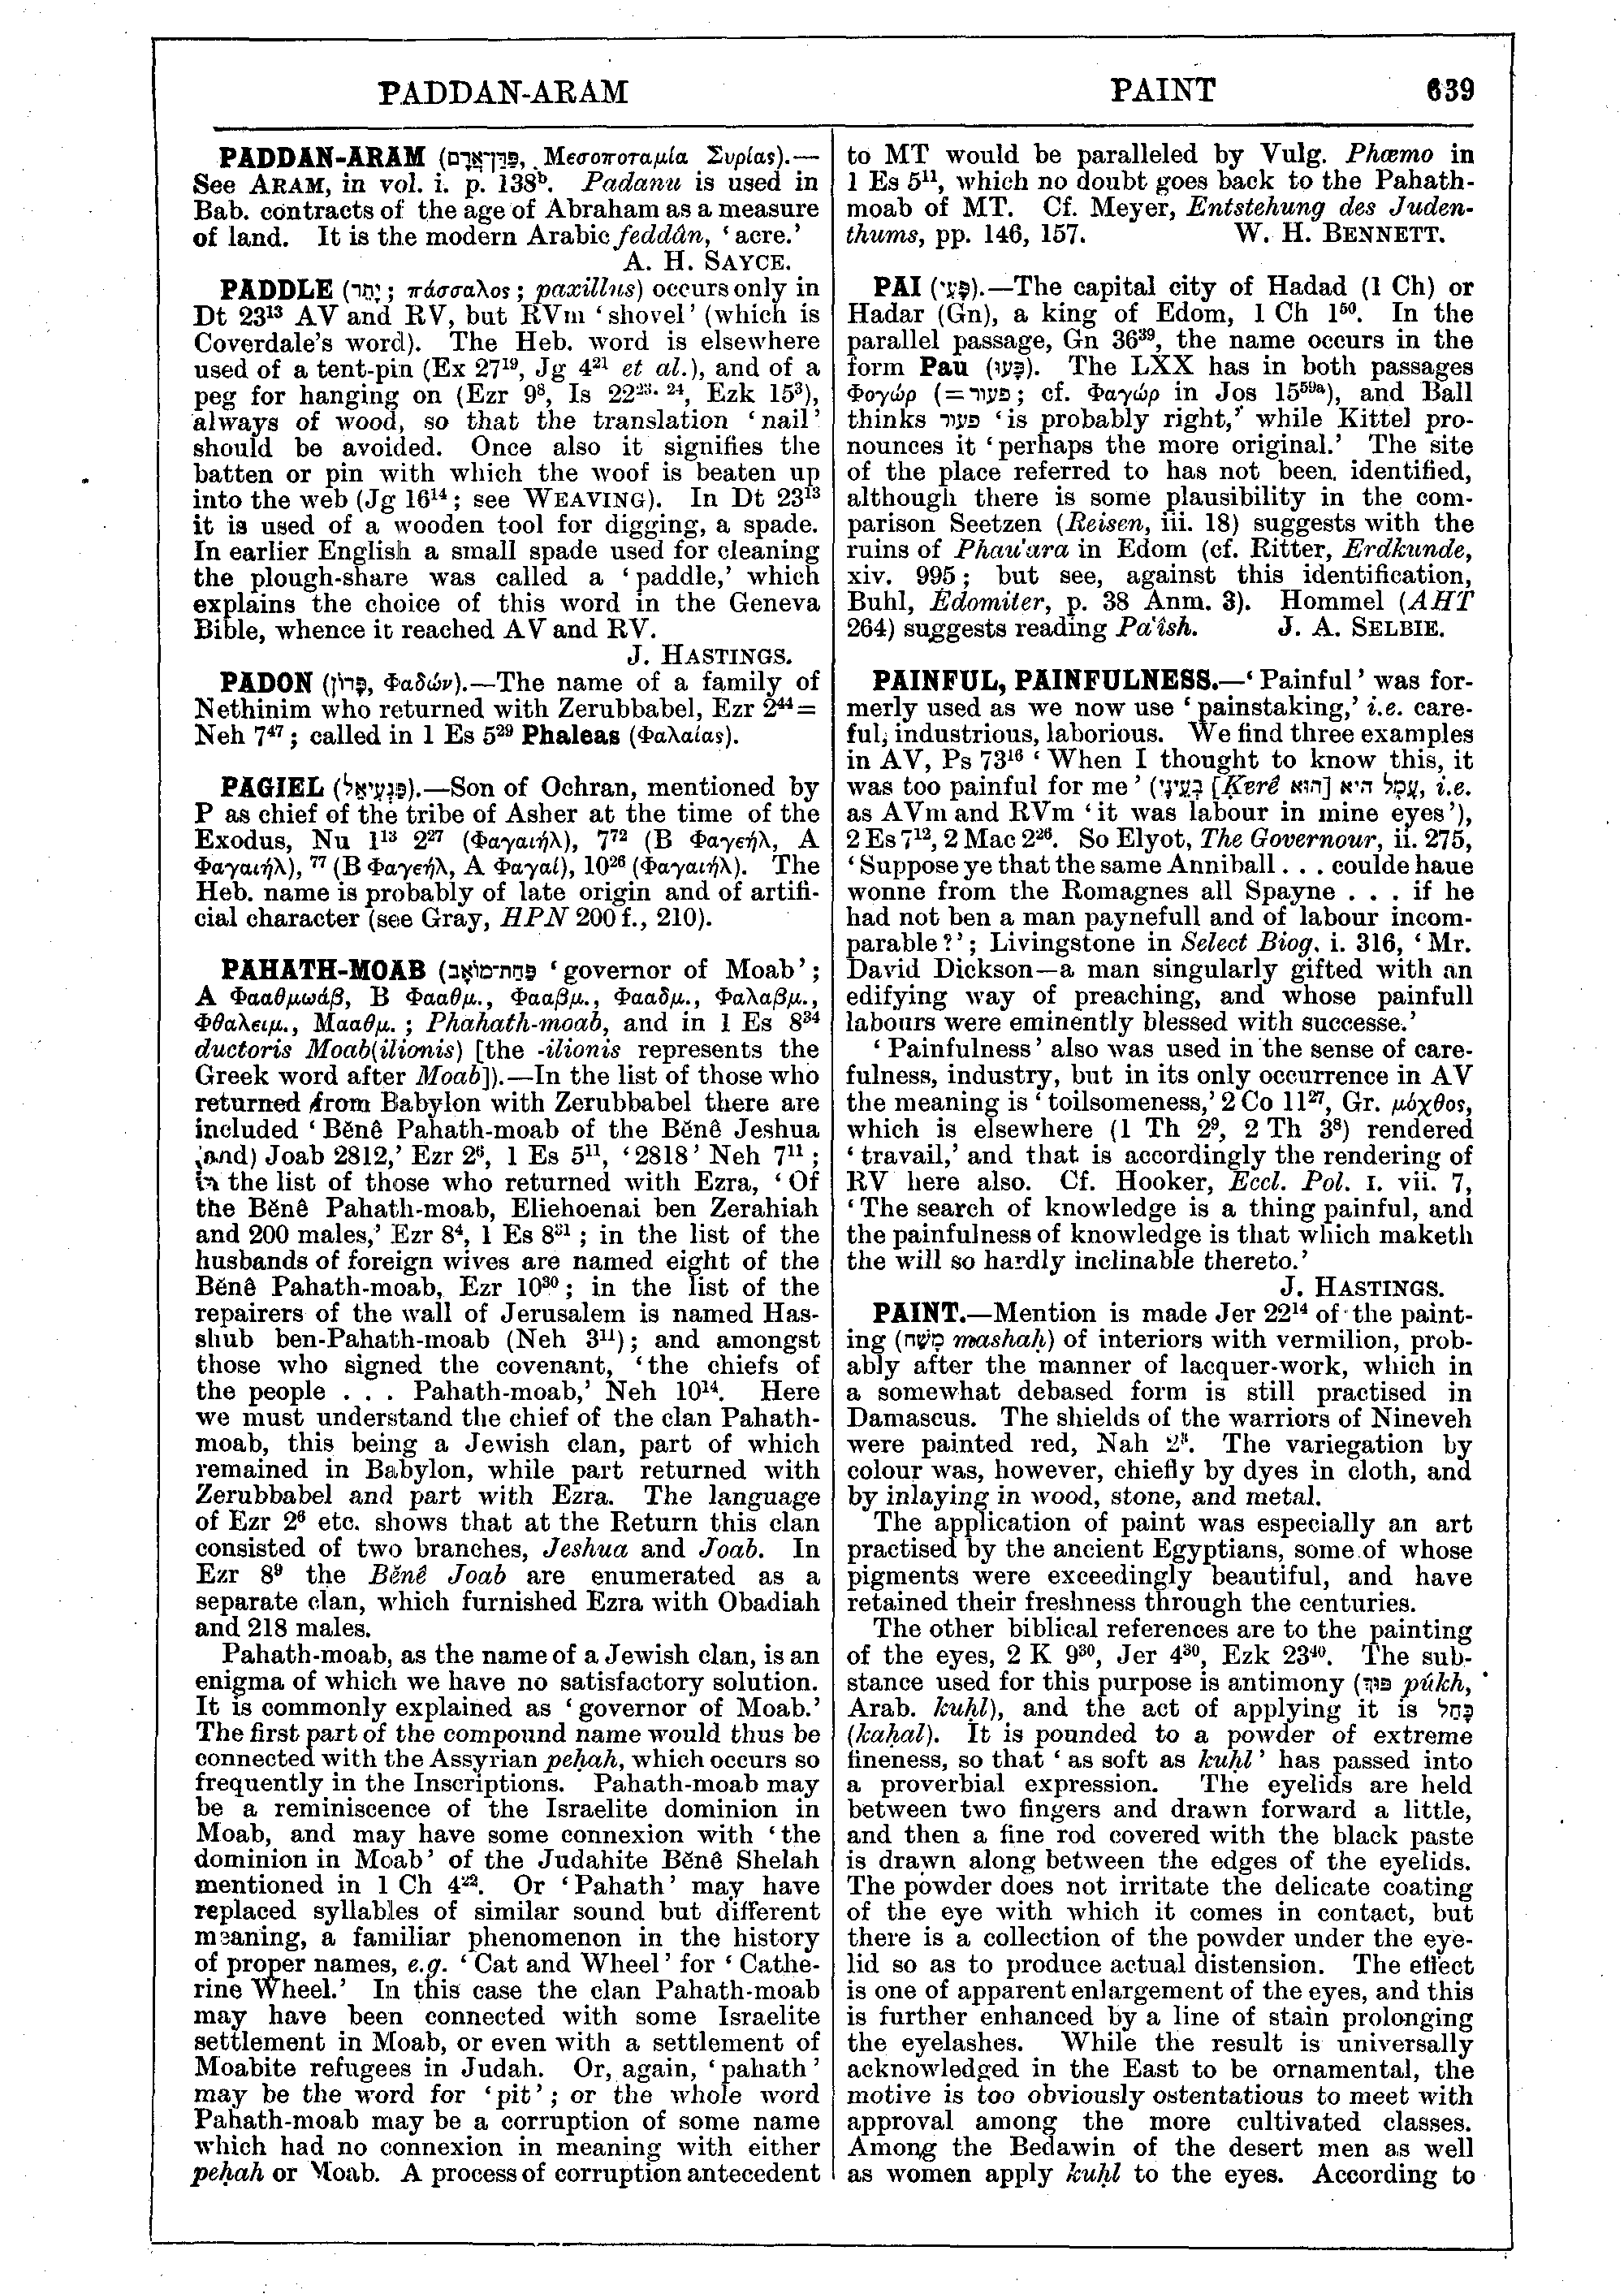 Image of page 639